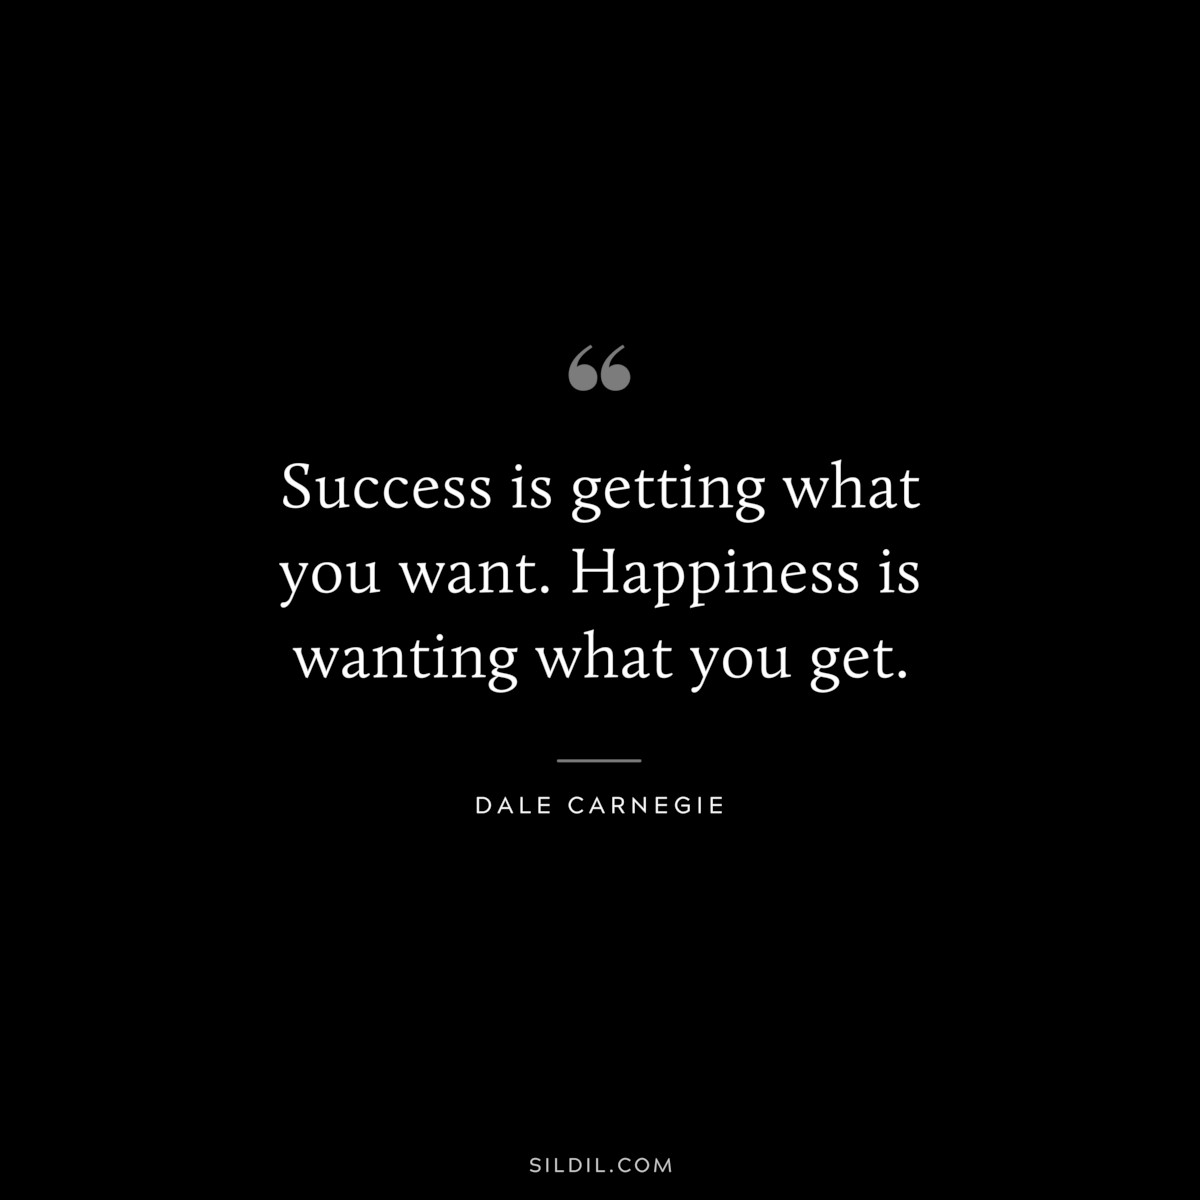 Success is getting what you want. Happiness is wanting what you get.― Dale Carnegie